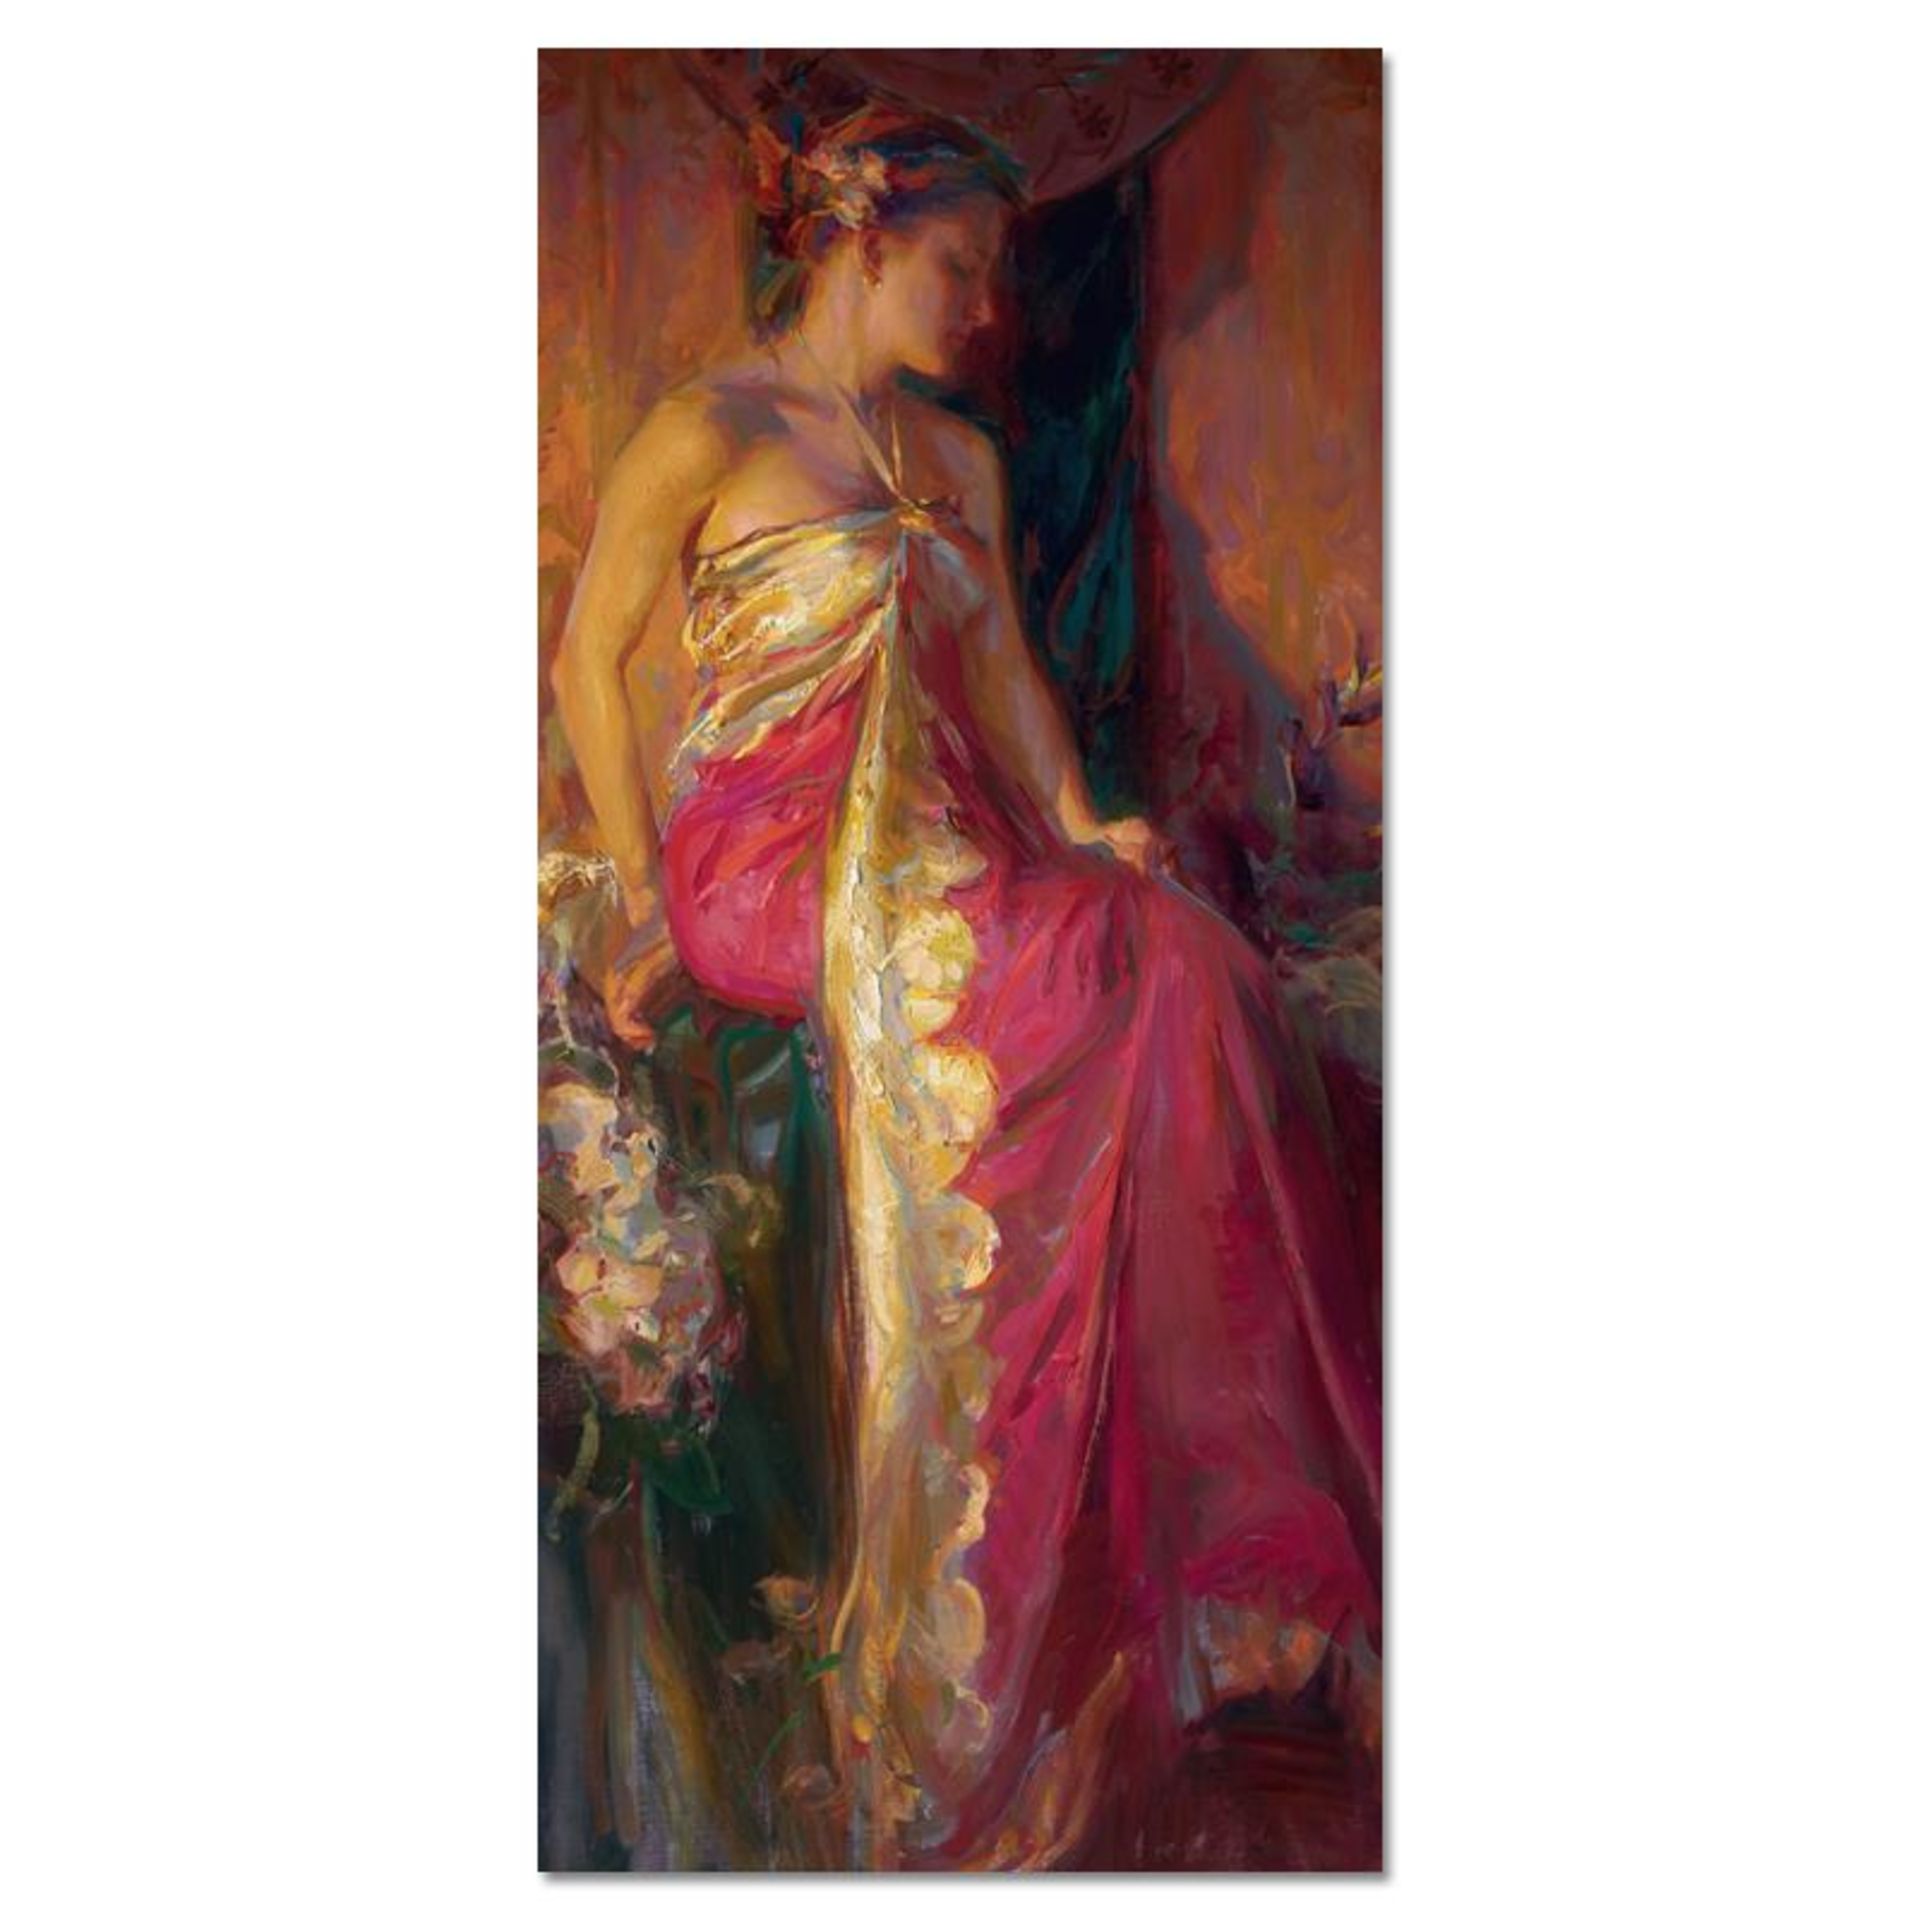 Dan Gerhartz, "Nouveau" Limited Edition on Canvas, Numbered and Hand Signed with